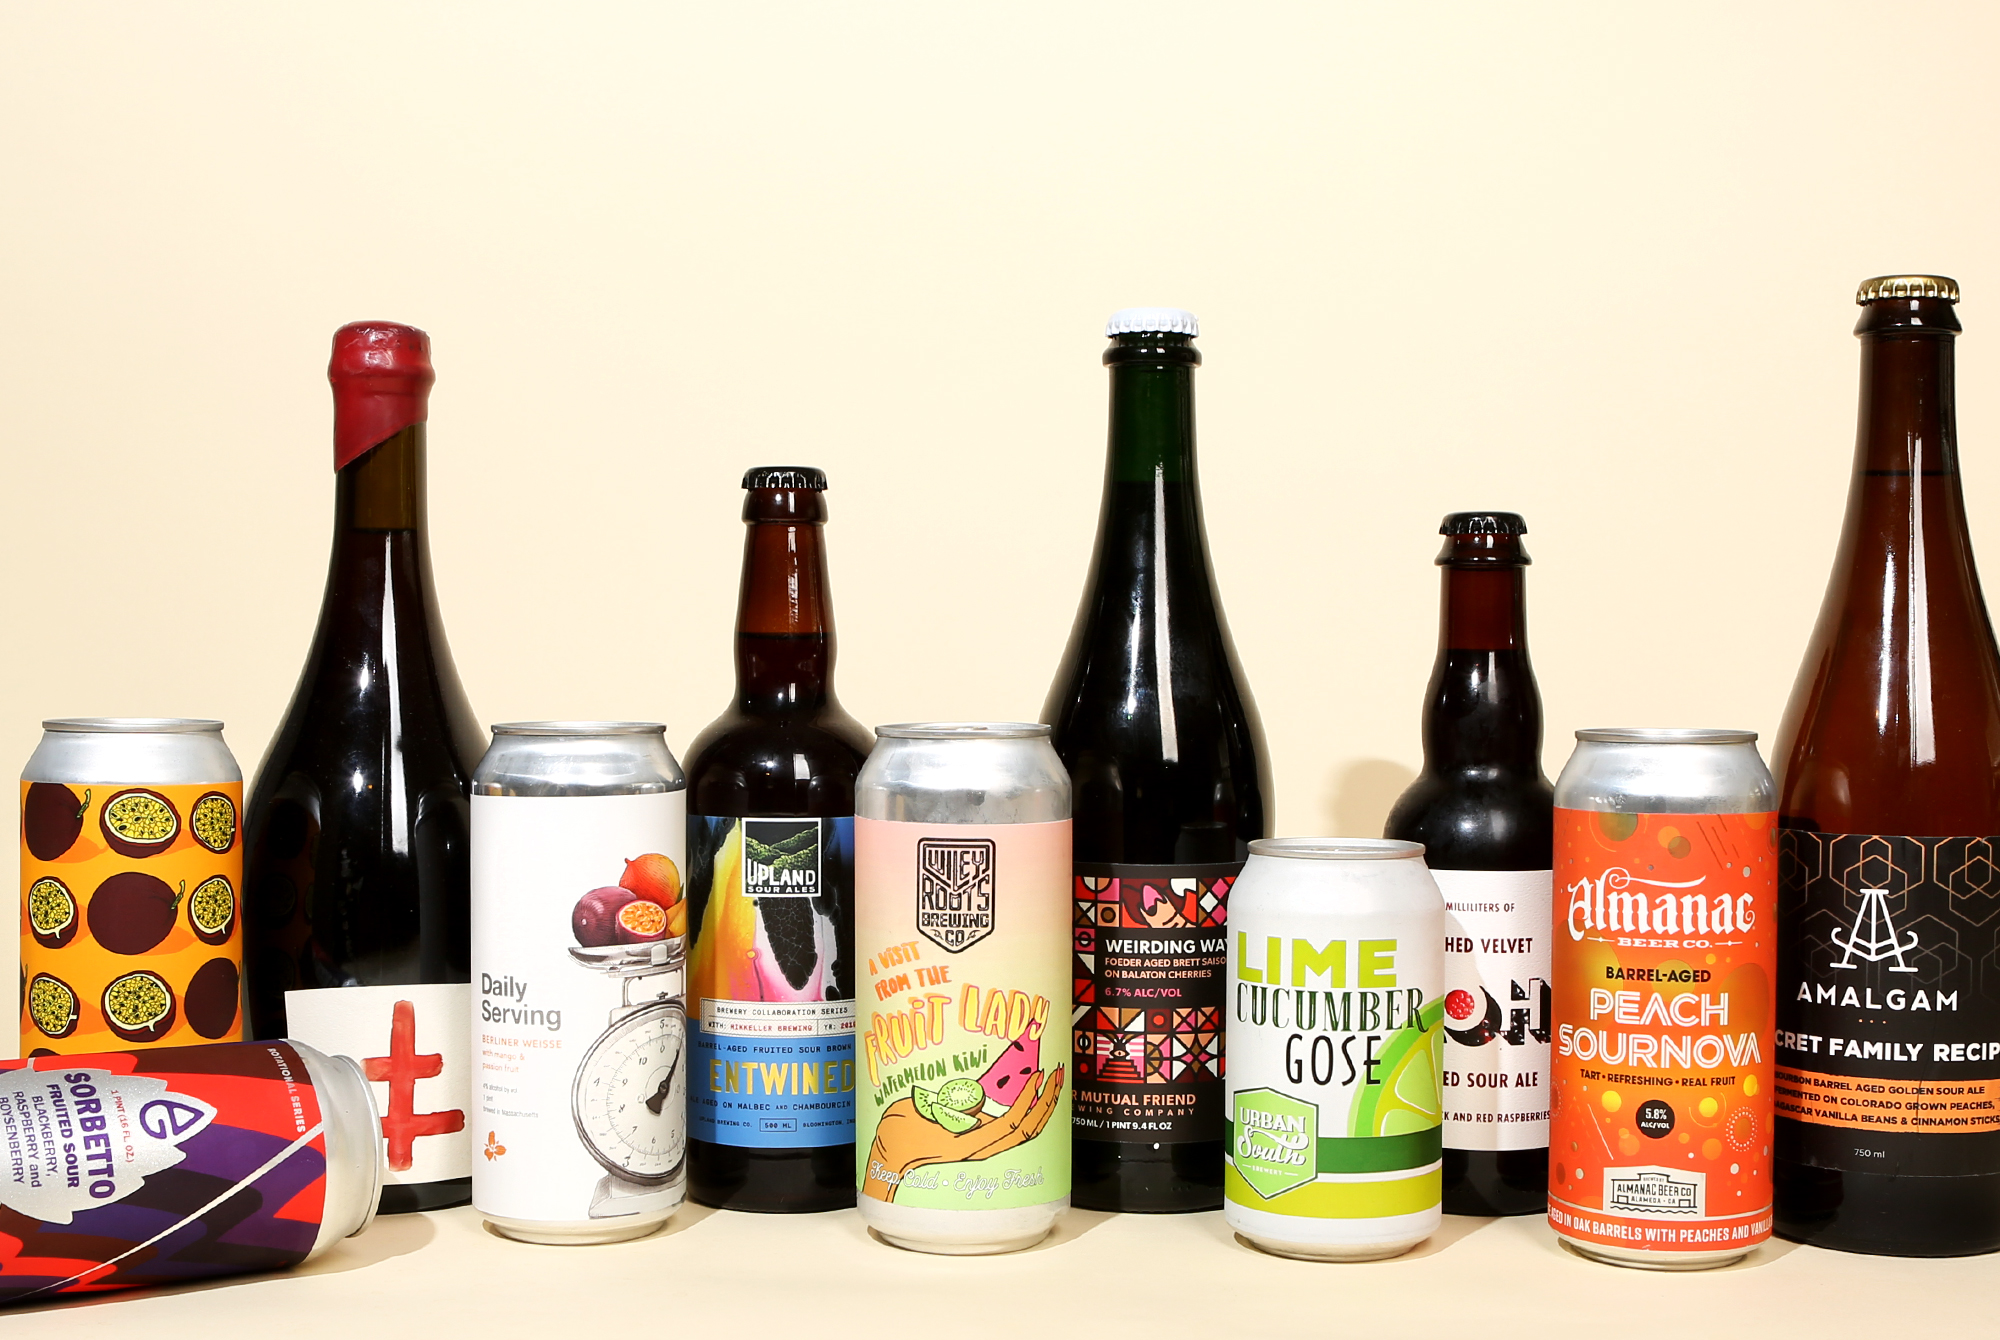 Should Sour Beer Have its Own Category?